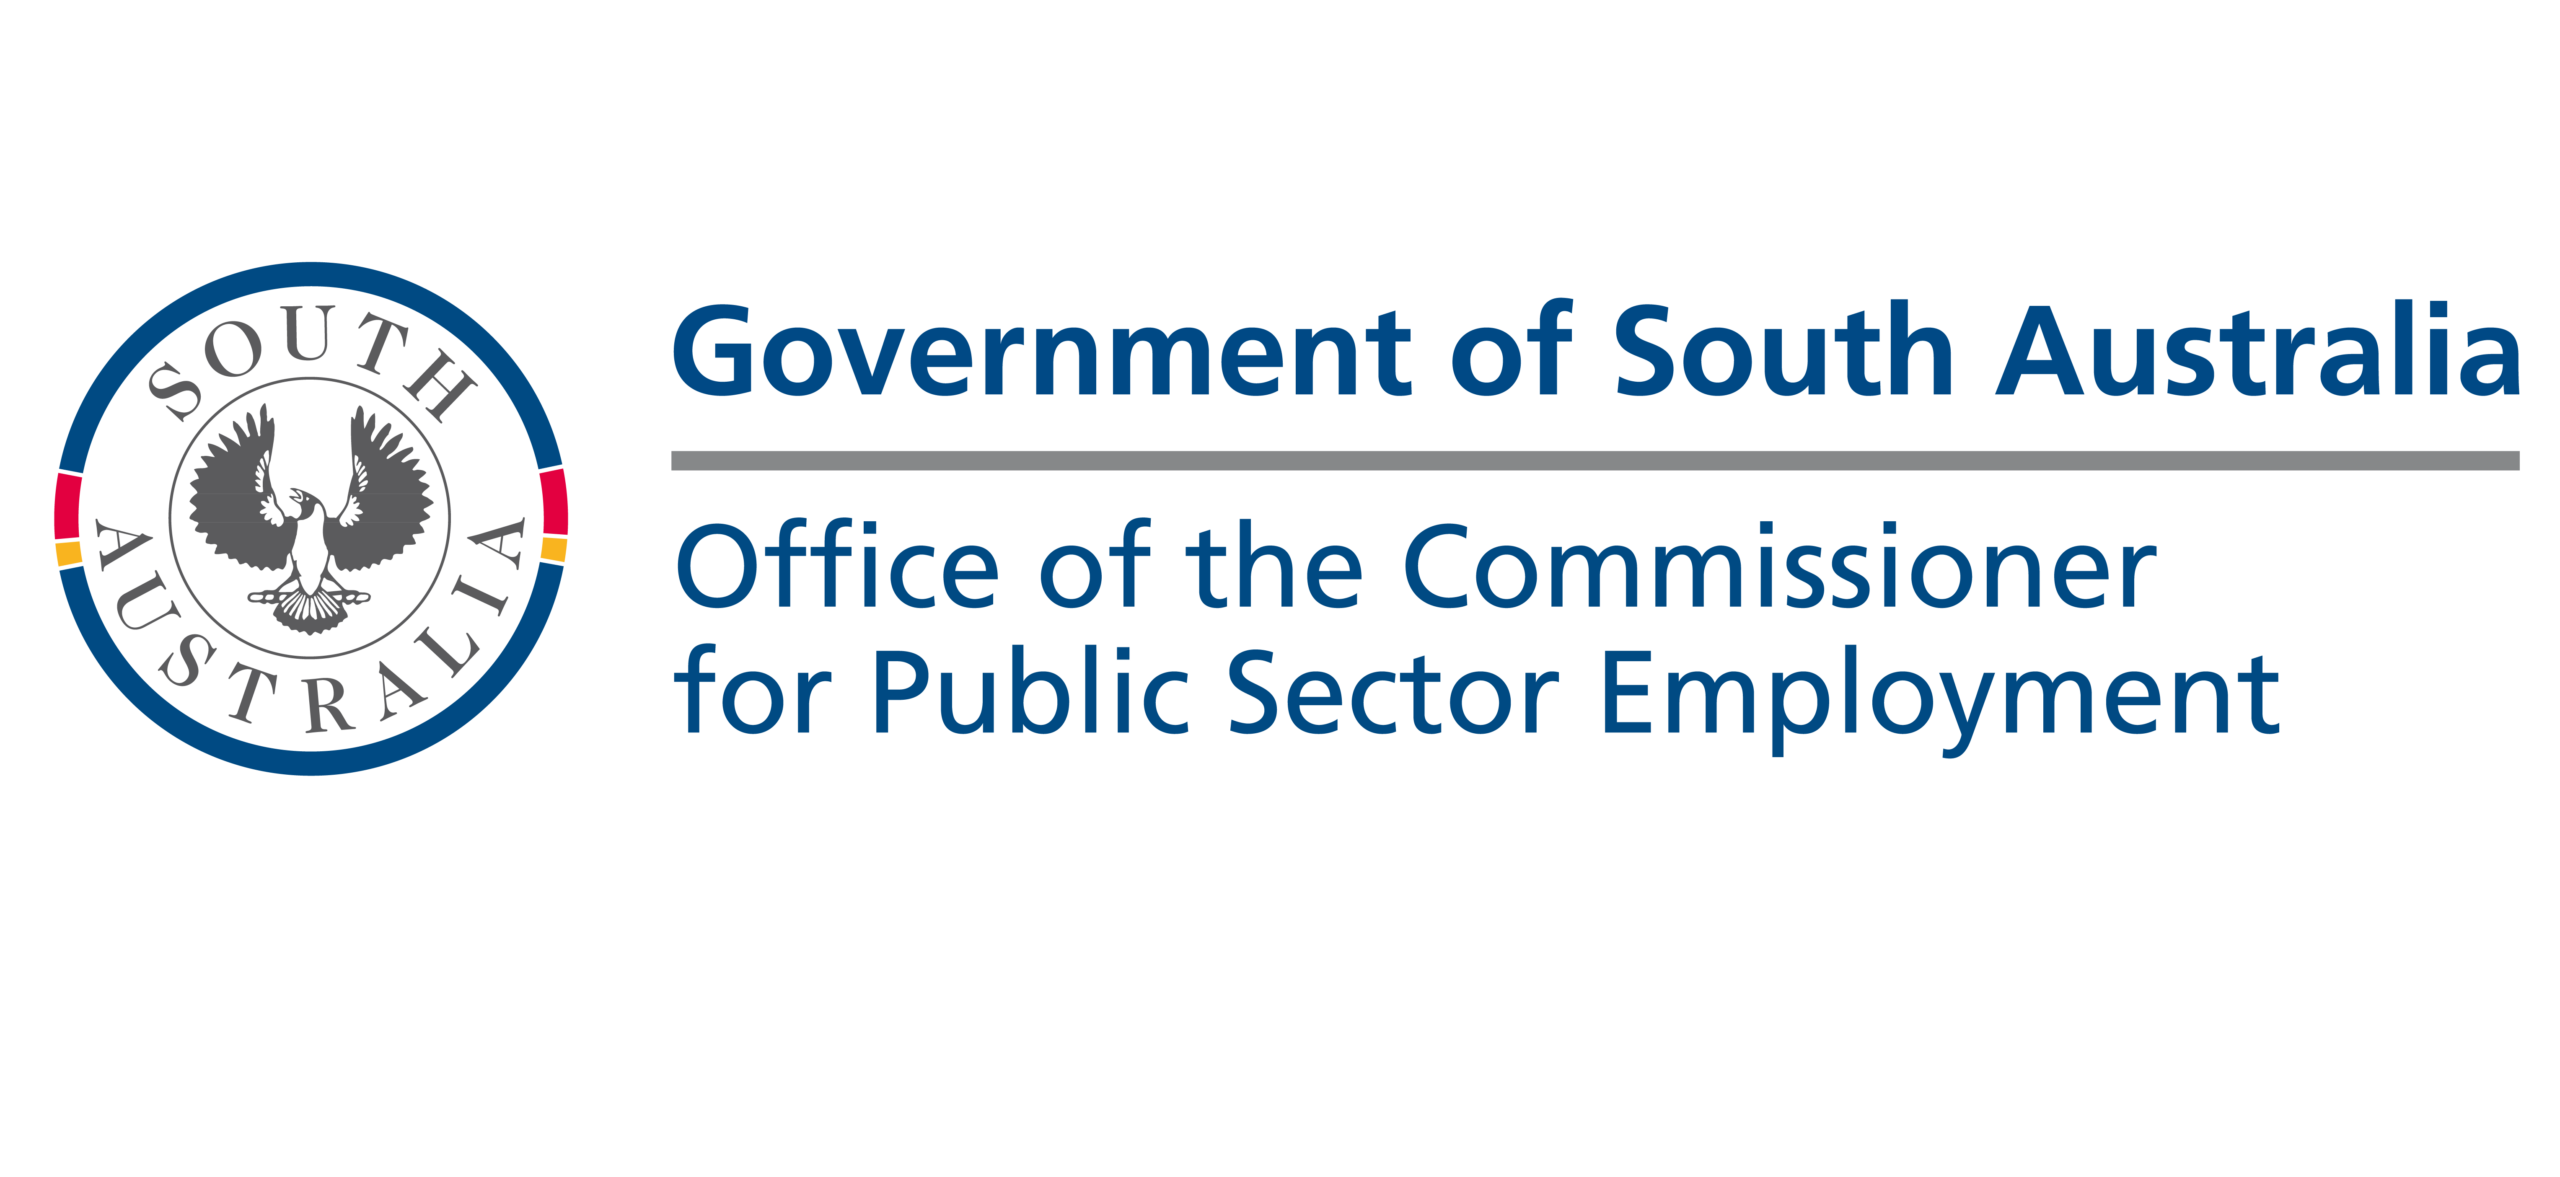 Office of the Commissioner for Public Sector Employment 